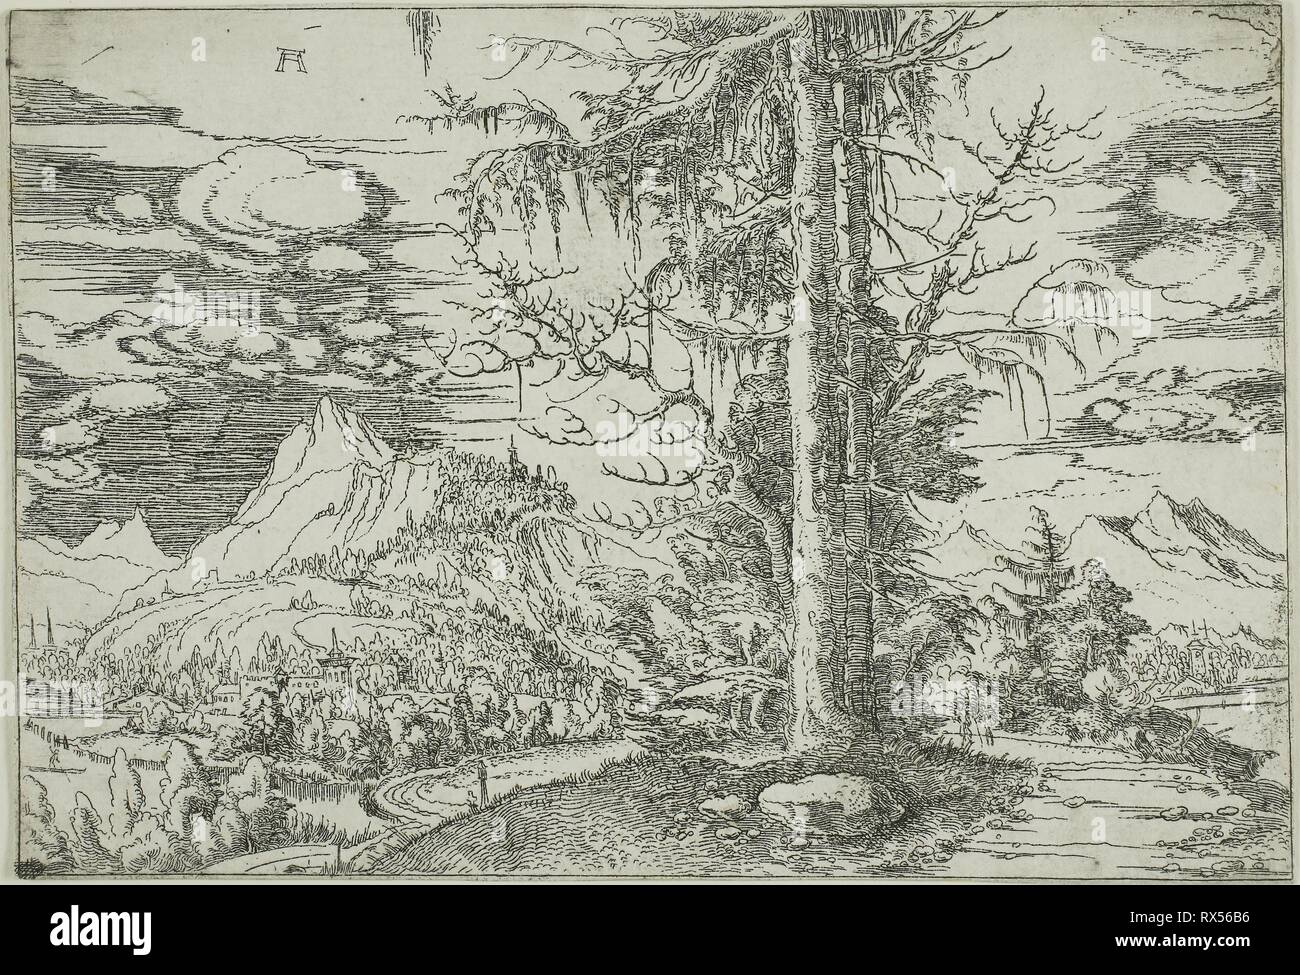 Landscape with A Double Spruce. Albrecht Altdorfer; German, c.1480-1538. Date: 1515-1520. Dimensions: 110 x 160 mm (image); 111 x 161 mm (sheet). Etching in black on ivory laid paper. Origin: Germany. Museum: The Chicago Art Institute. Stock Photo